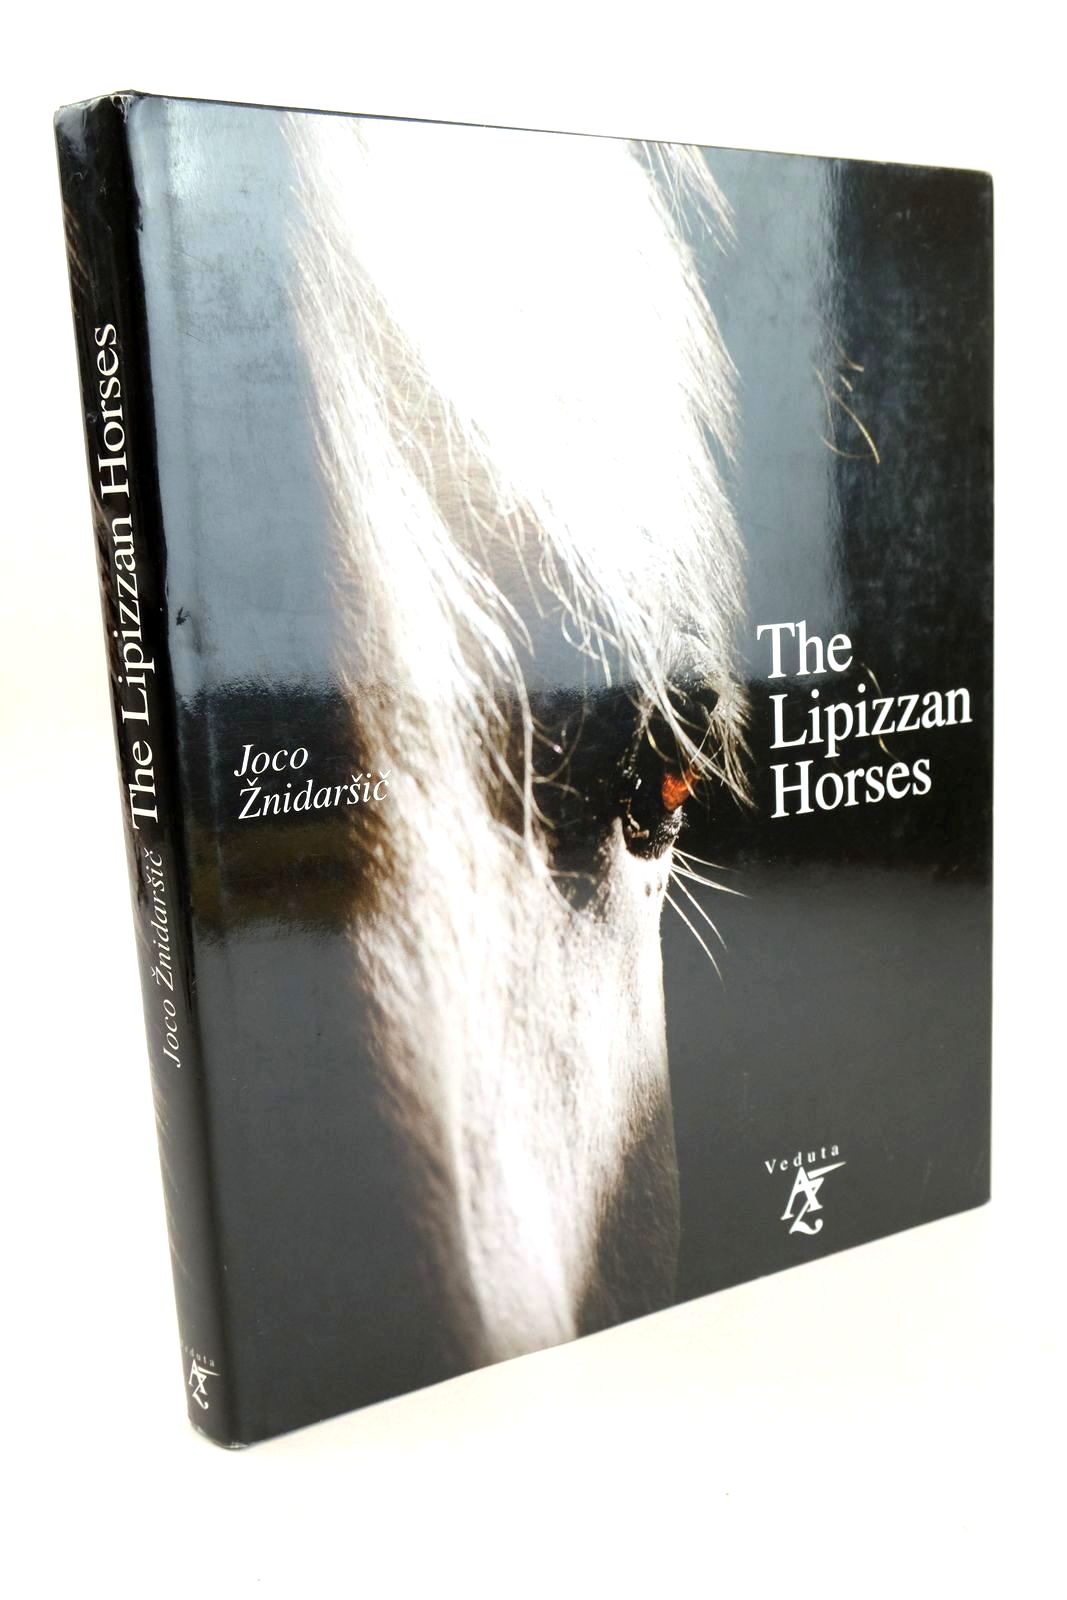 Photo of THE LIPIZZAN HORSES written by Kozinc, Zeljko Rus, Janez illustrated by Znidarsic, Joco published by Veduta (STOCK CODE: 1327627)  for sale by Stella & Rose's Books